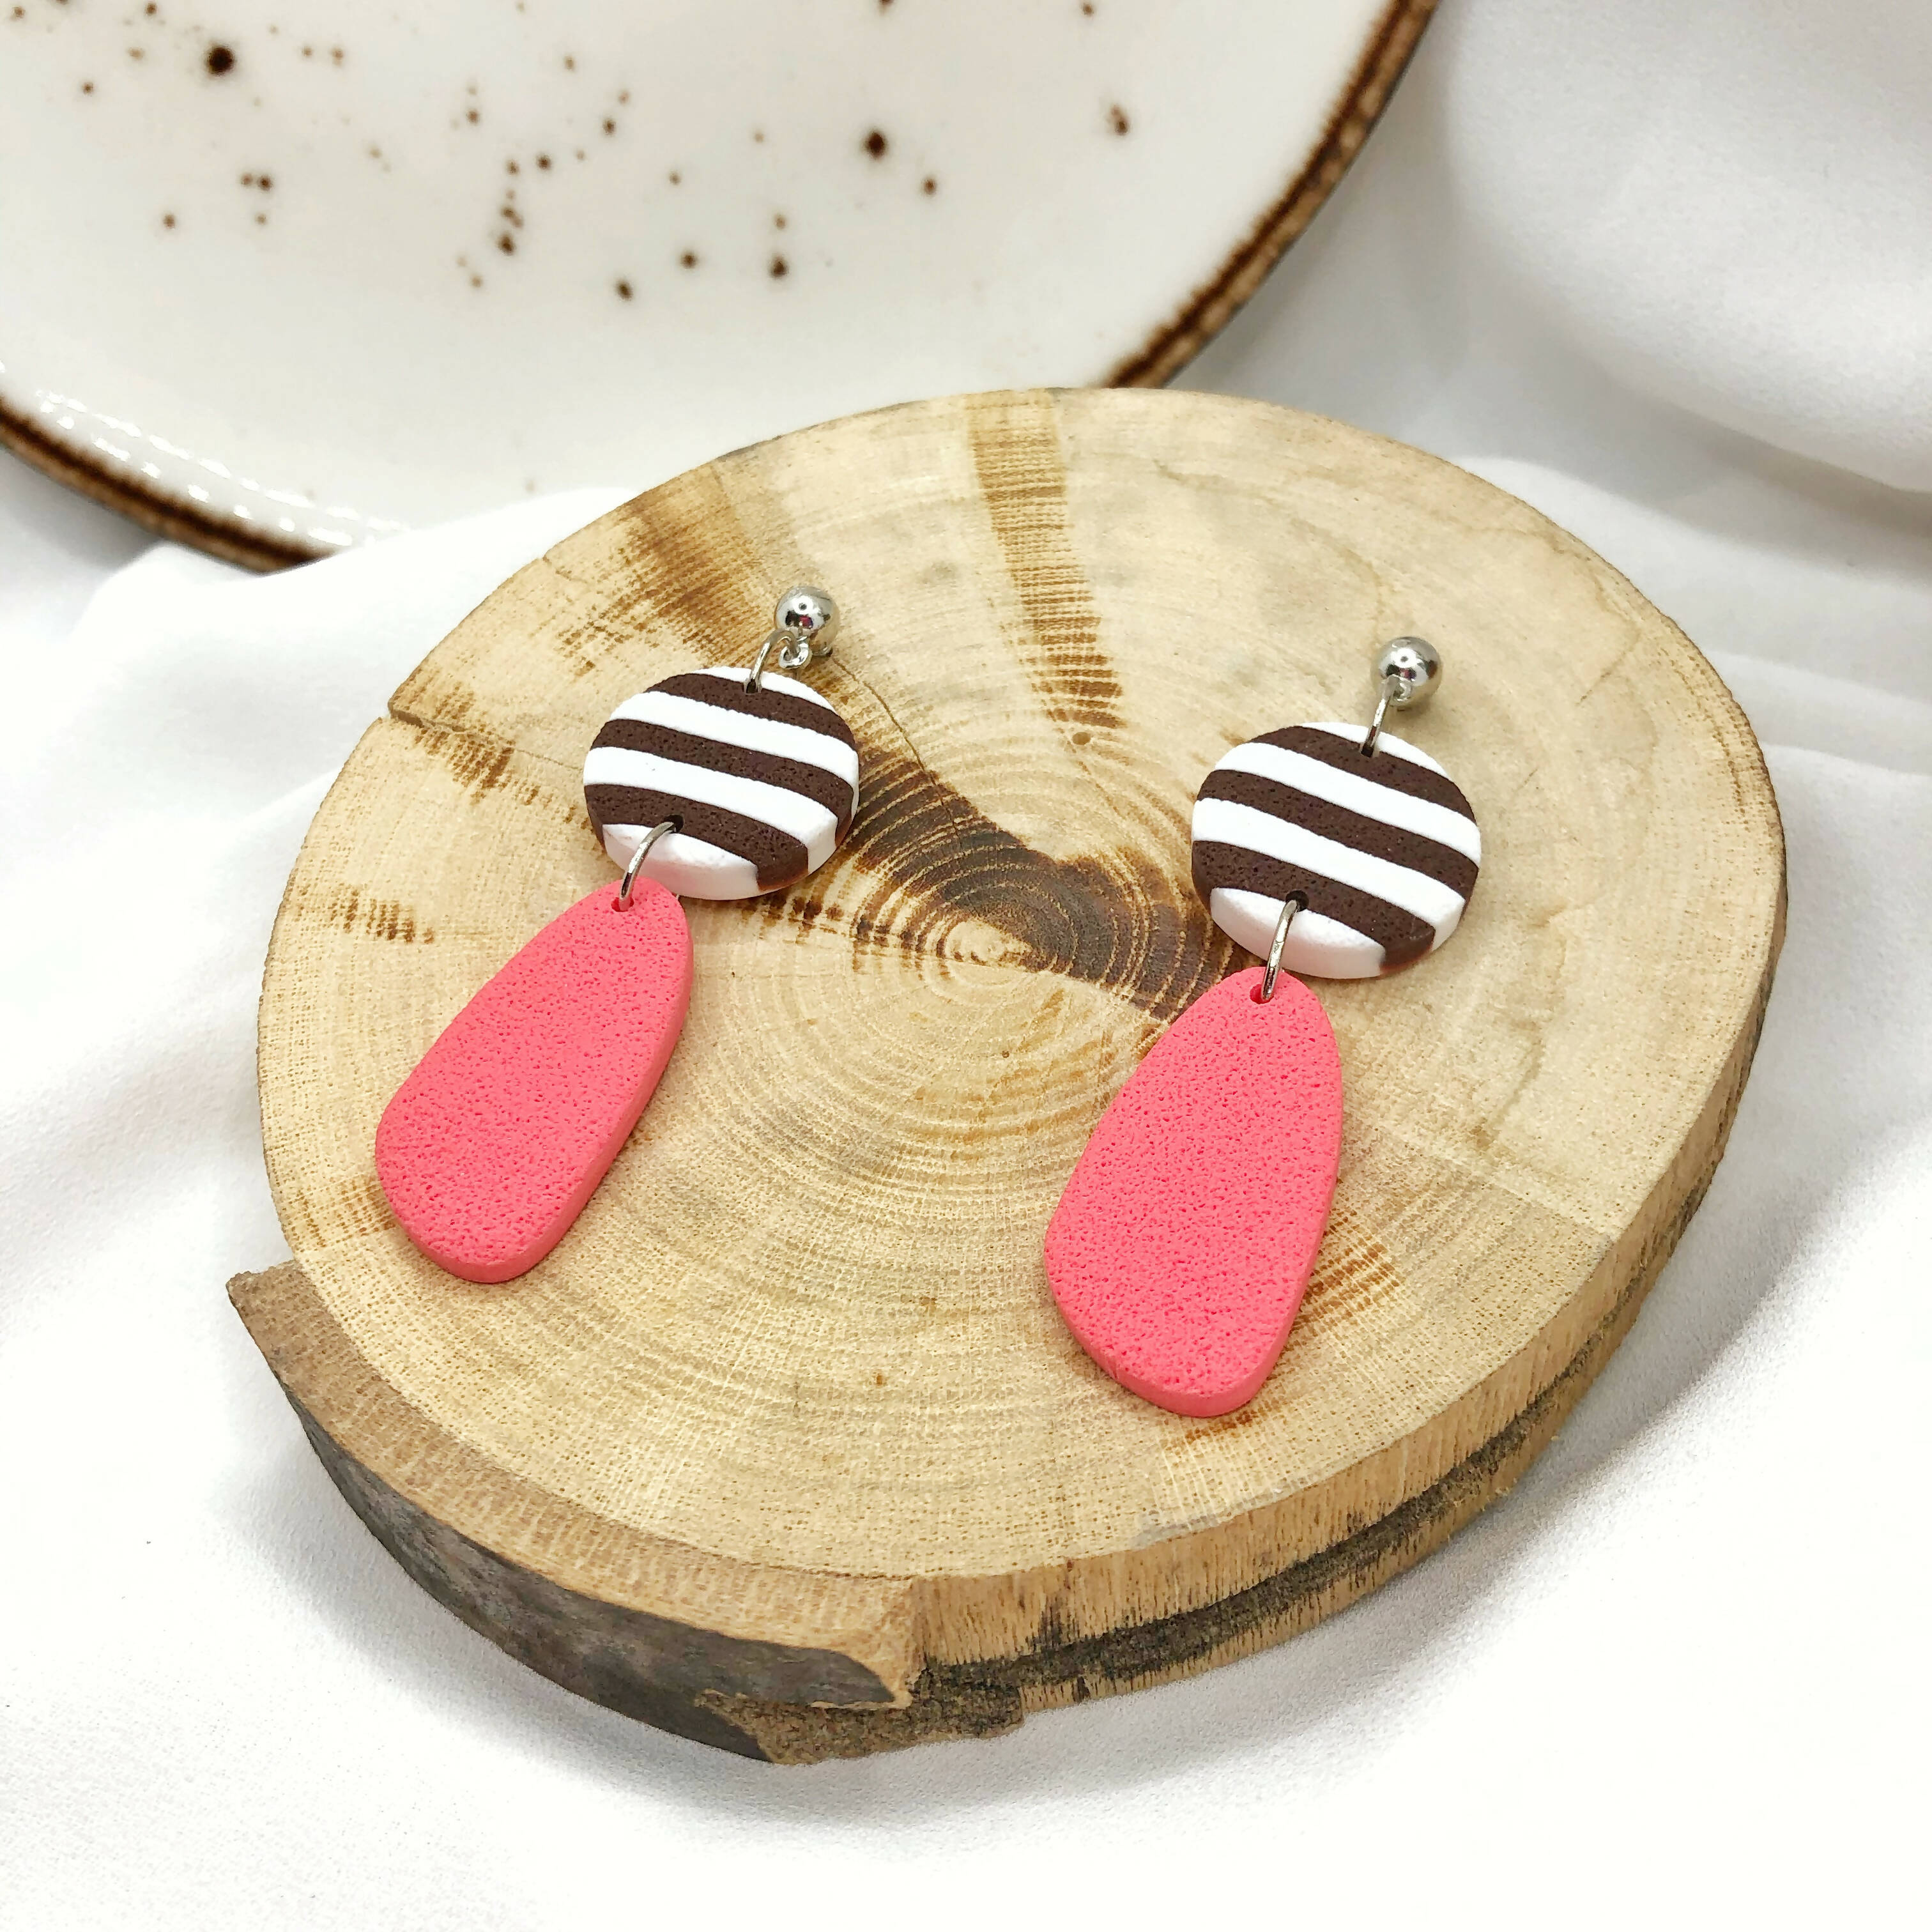 Women's Stylish Earrings, Hand Crafted Polymer Clay Earrings, Nickel Free Women's Earrings - Wear Sierra